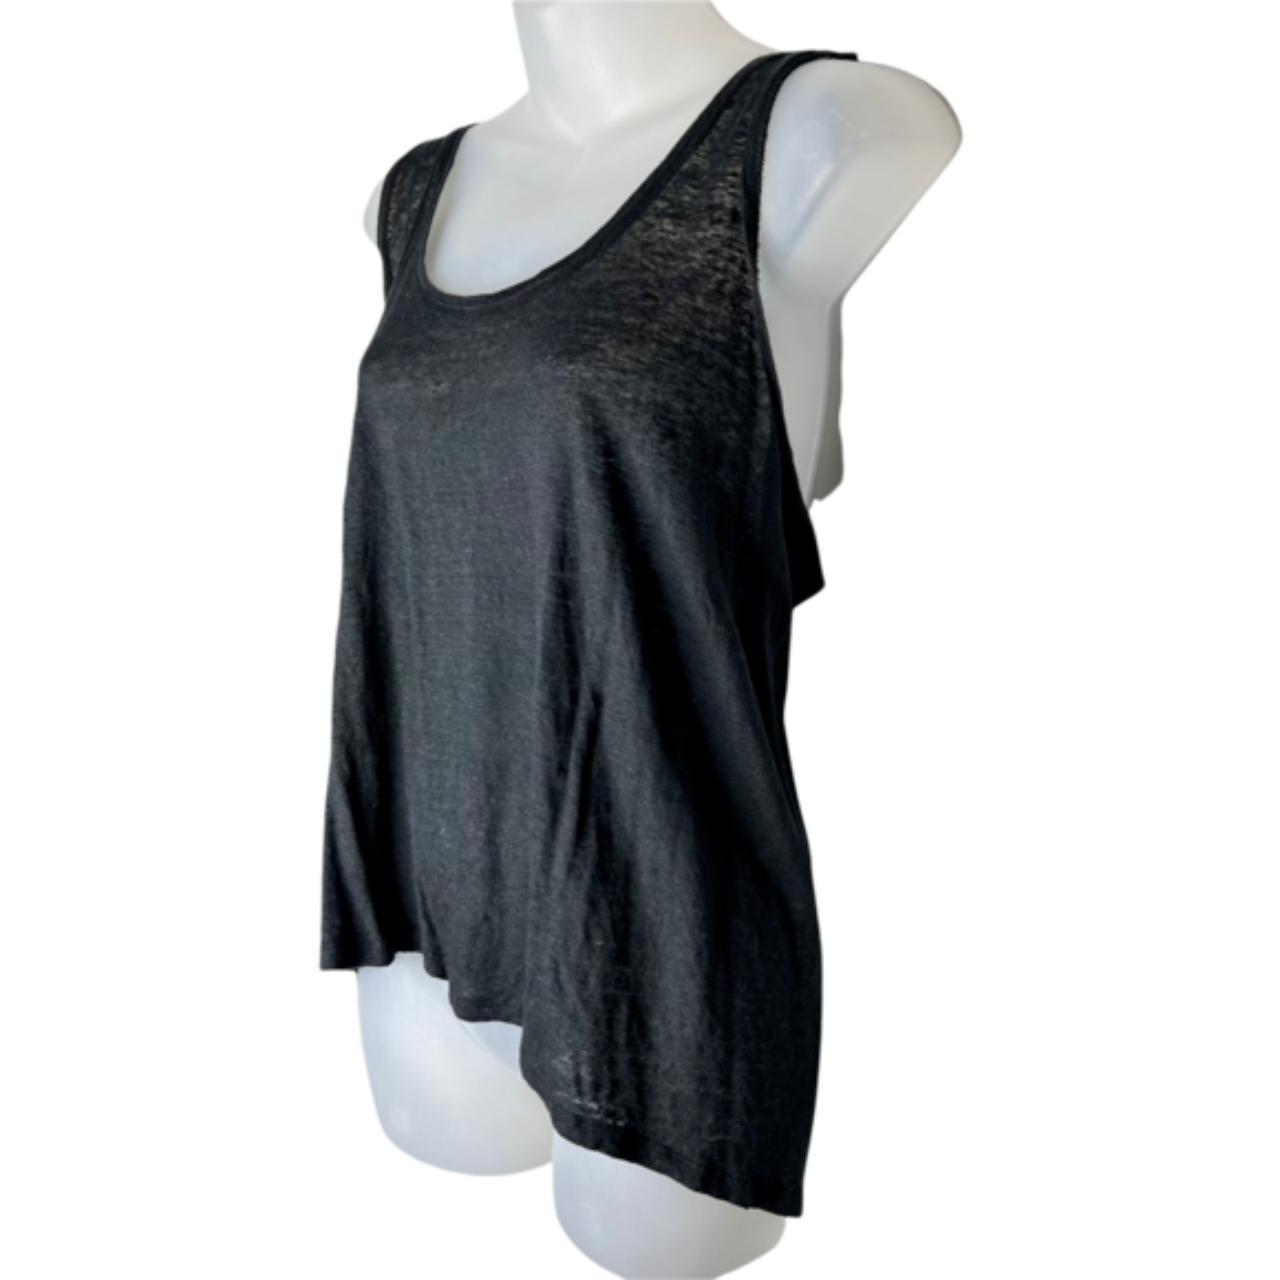 PAIGE Women's Black and White Vests-tanks-camis (3)